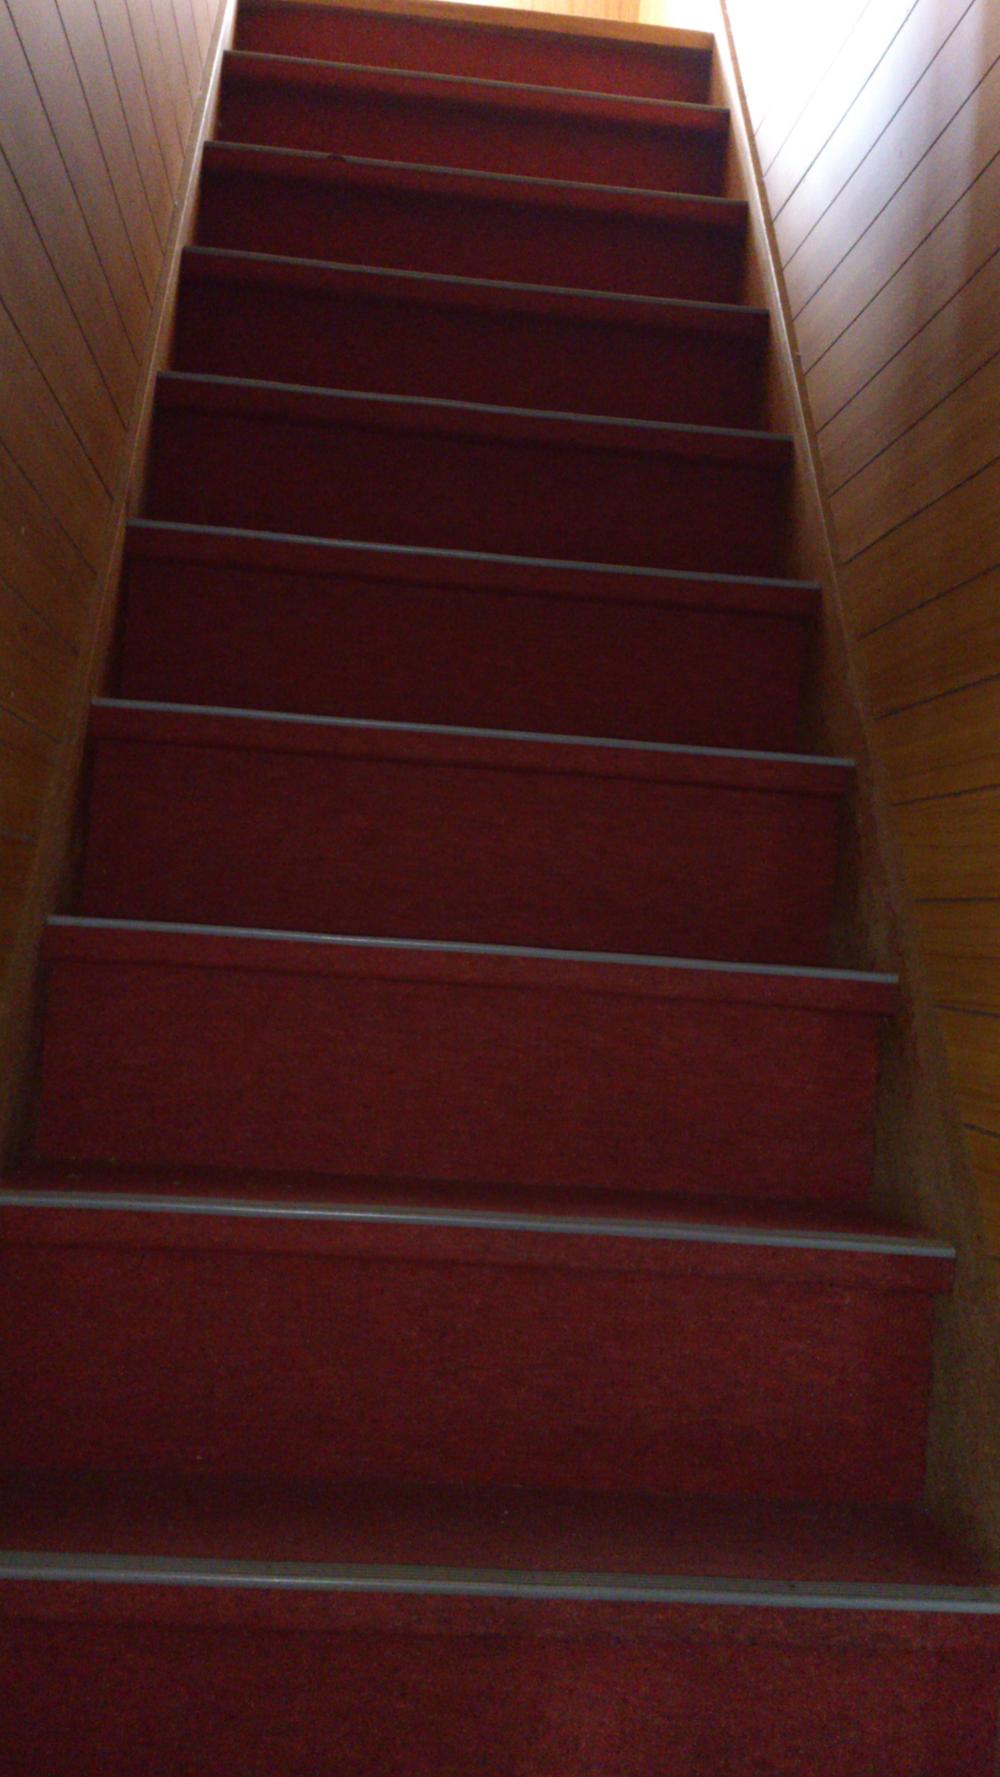 Other. Stairs to the second floor